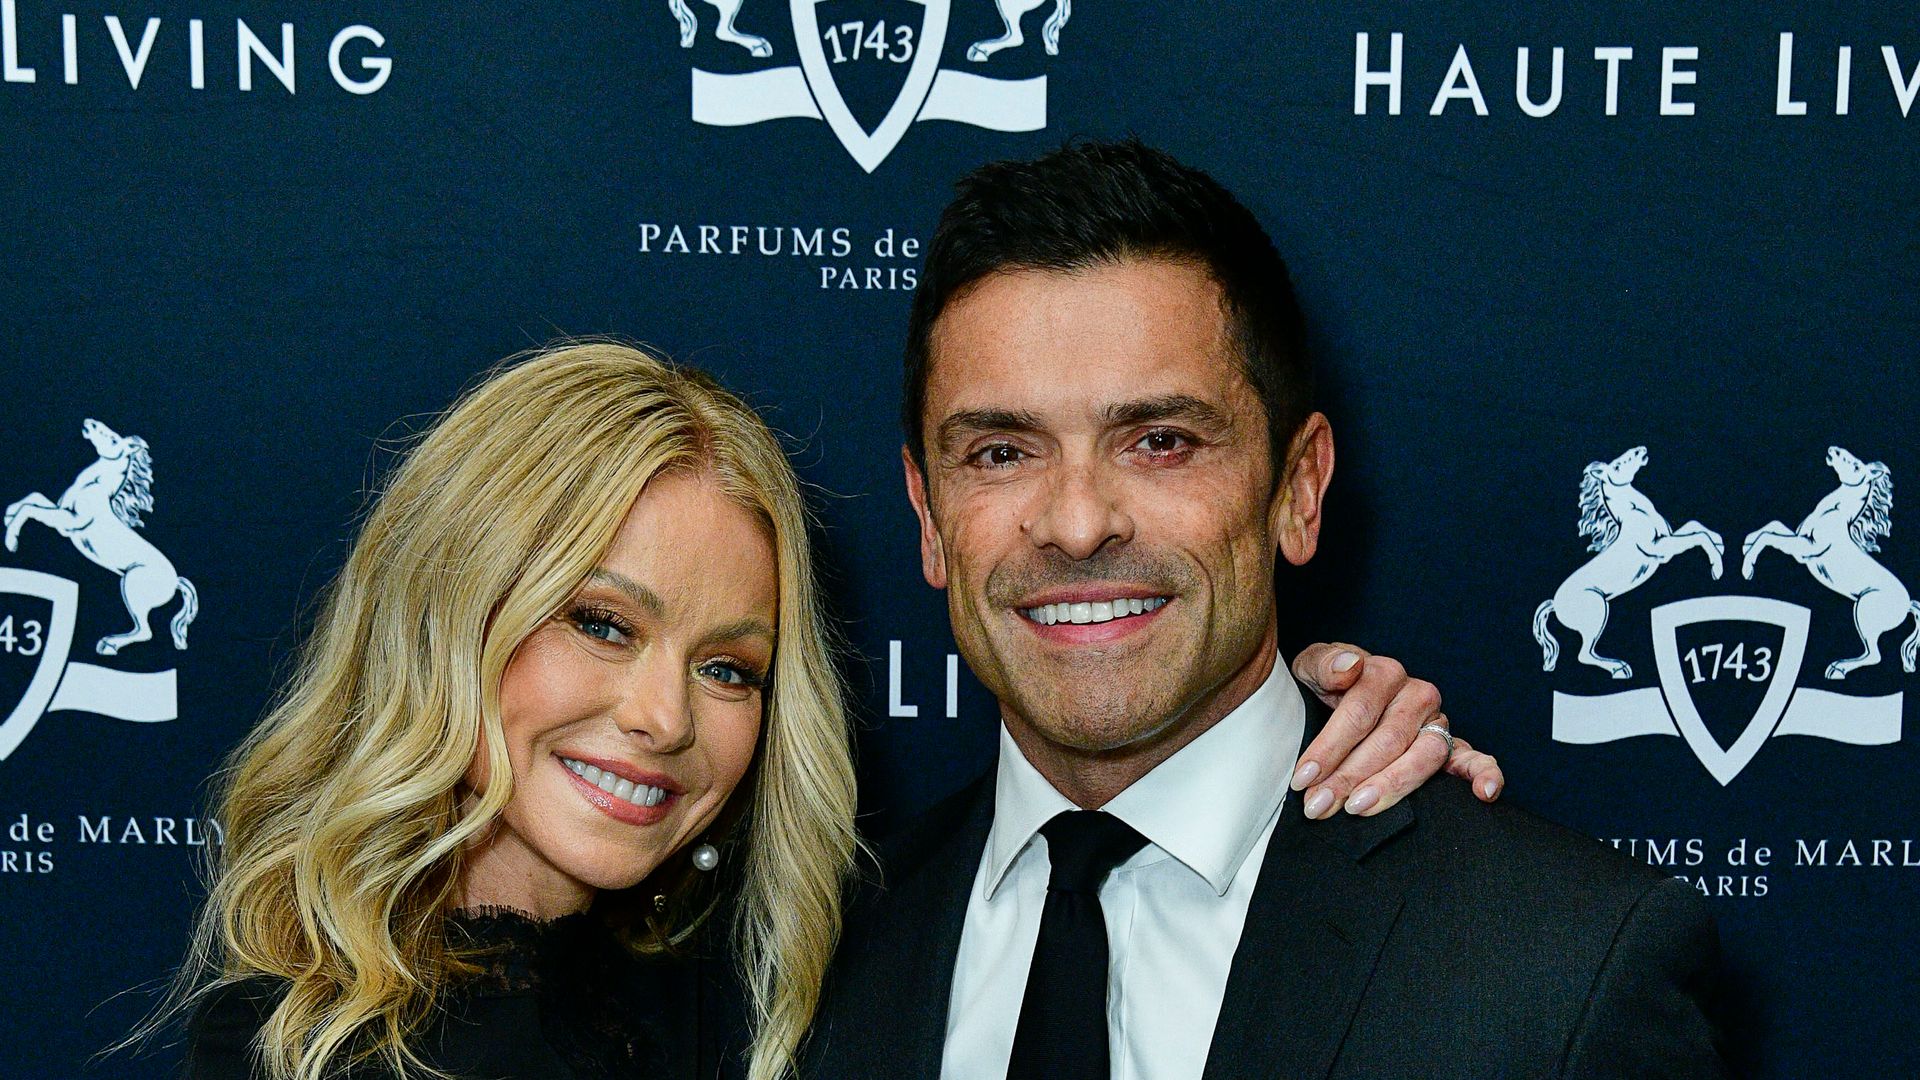 Kelly Ripa and Mark Consuelos leave fans in awe as they recreate photo from 1996 Las Vegas elopement